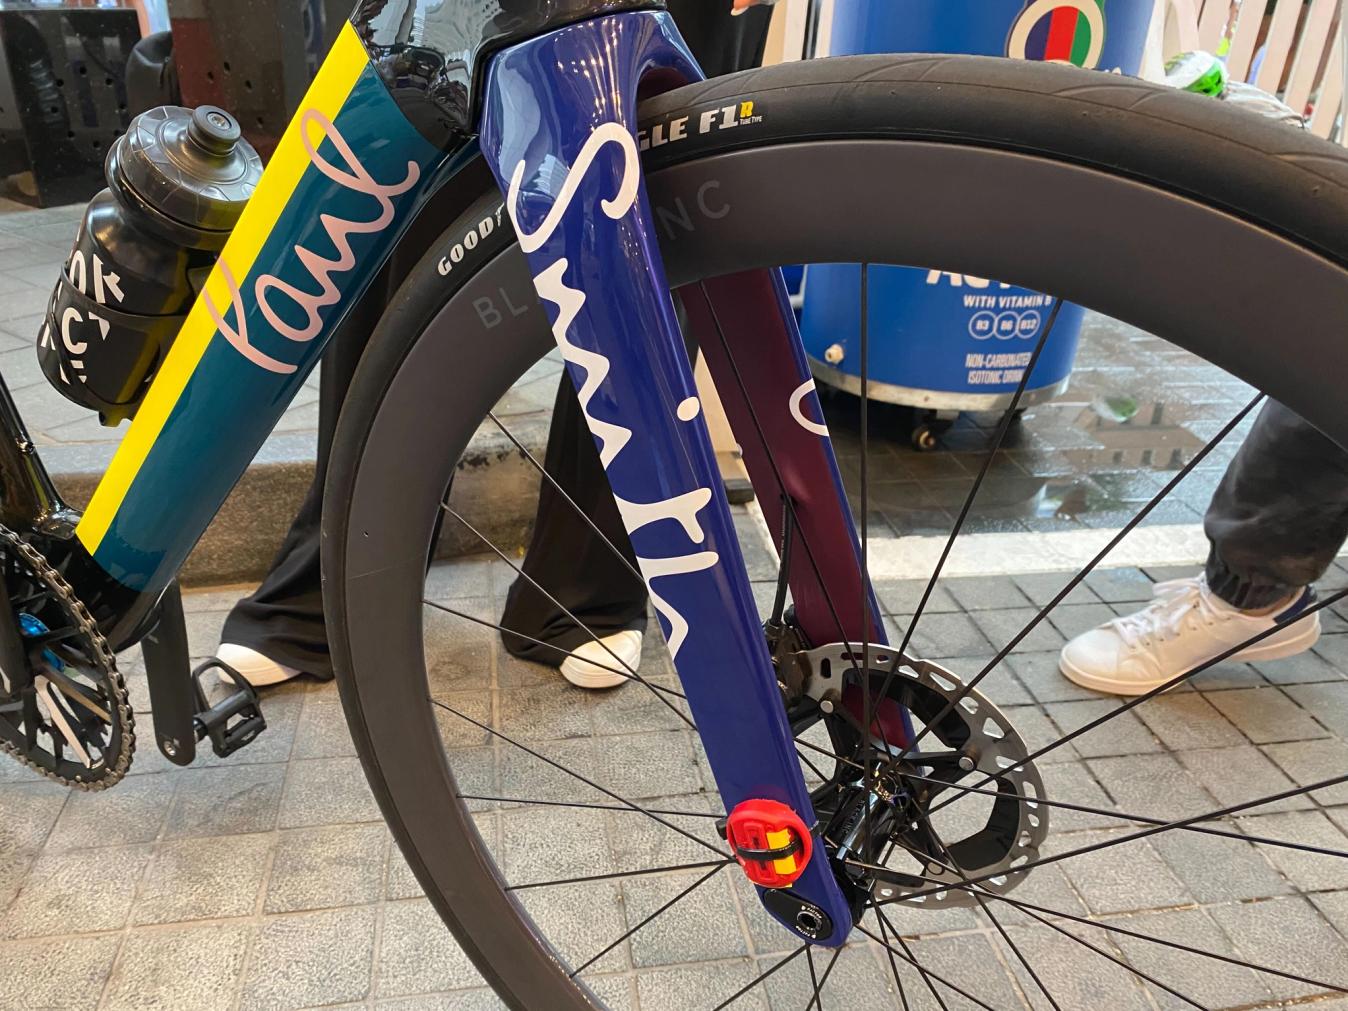 The Paul Smith logo spreads across the downtube and fork